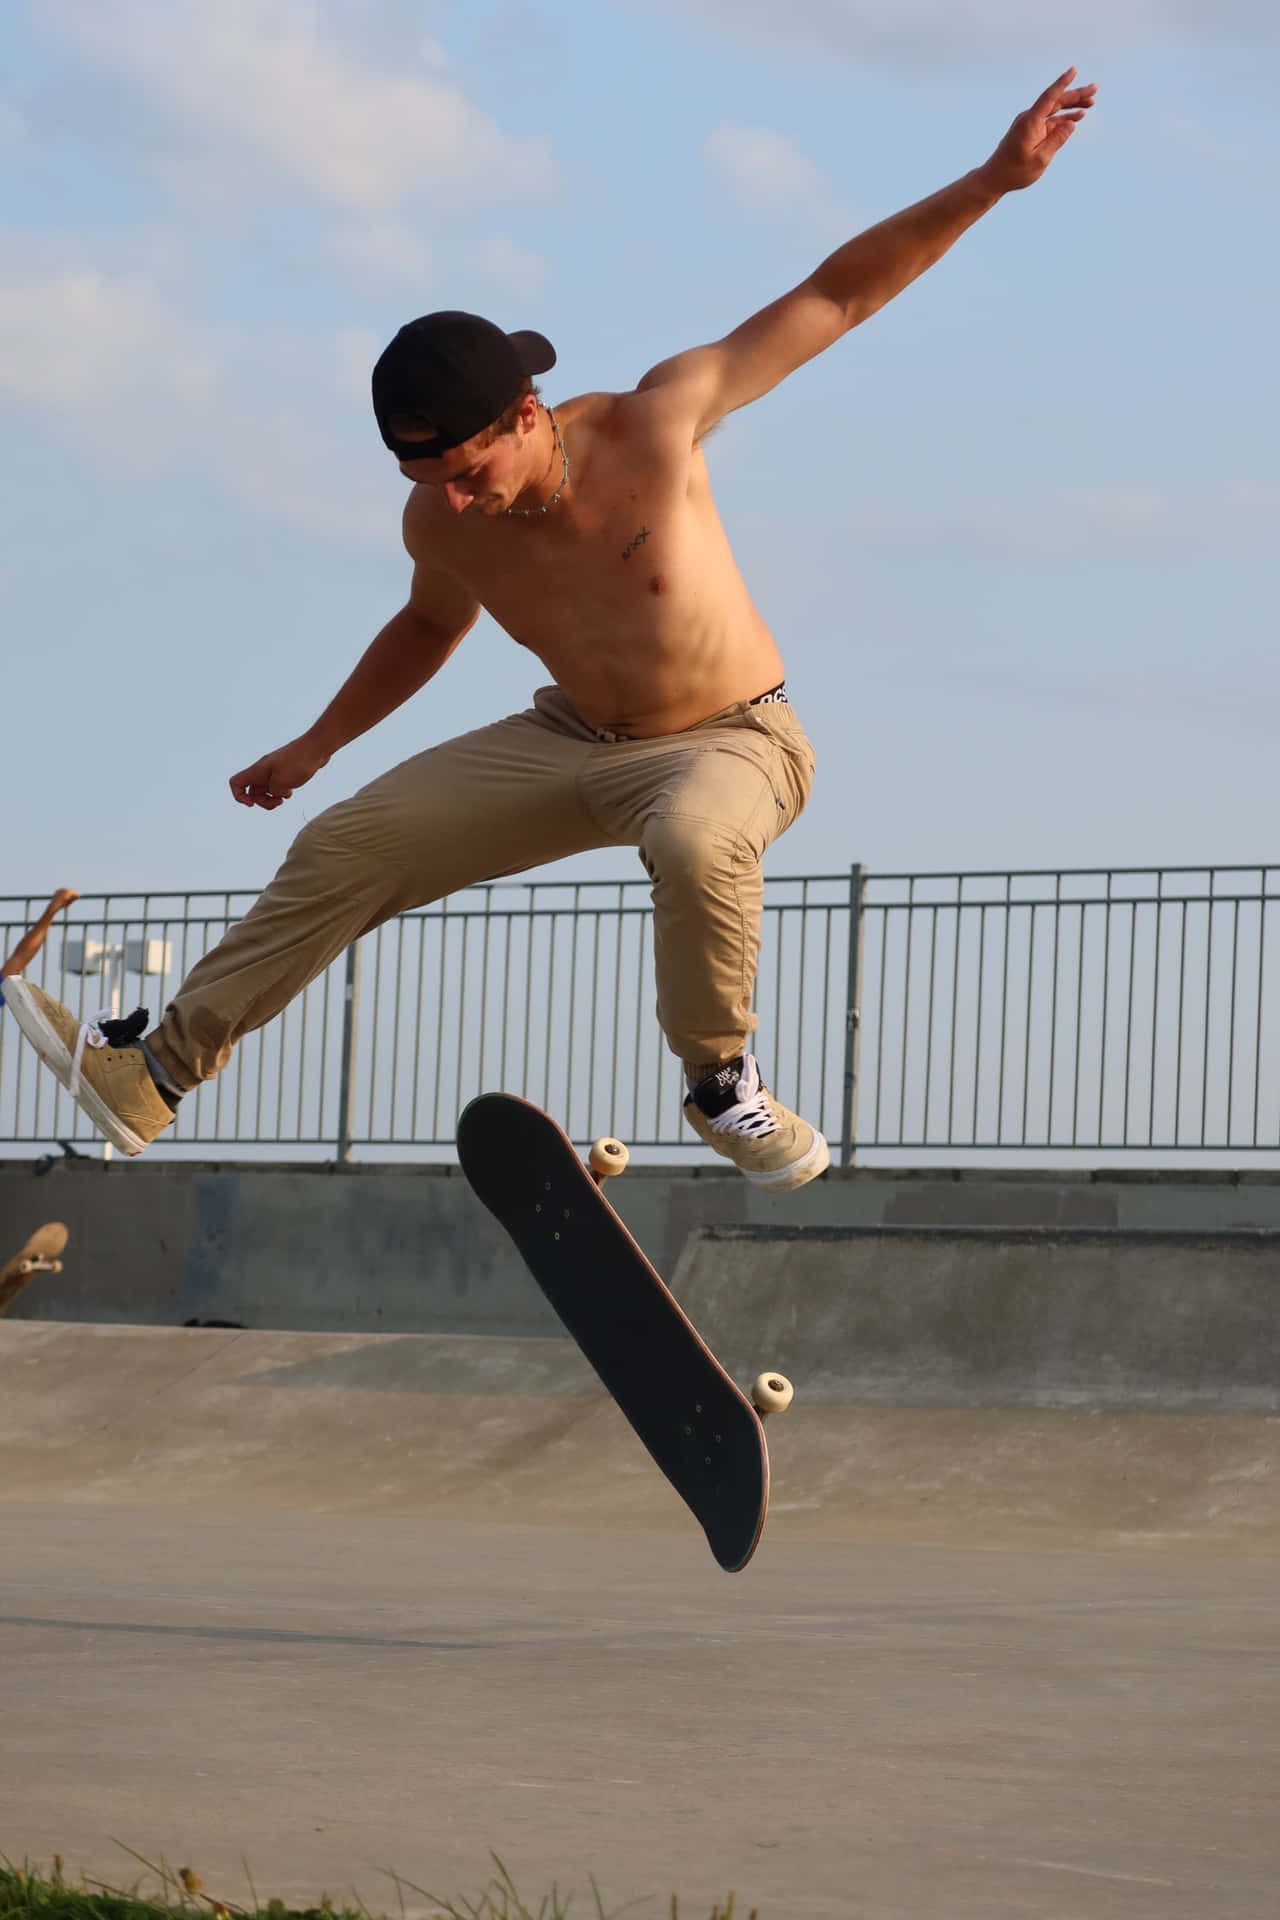 A skateboarder shows their skills in the streets.